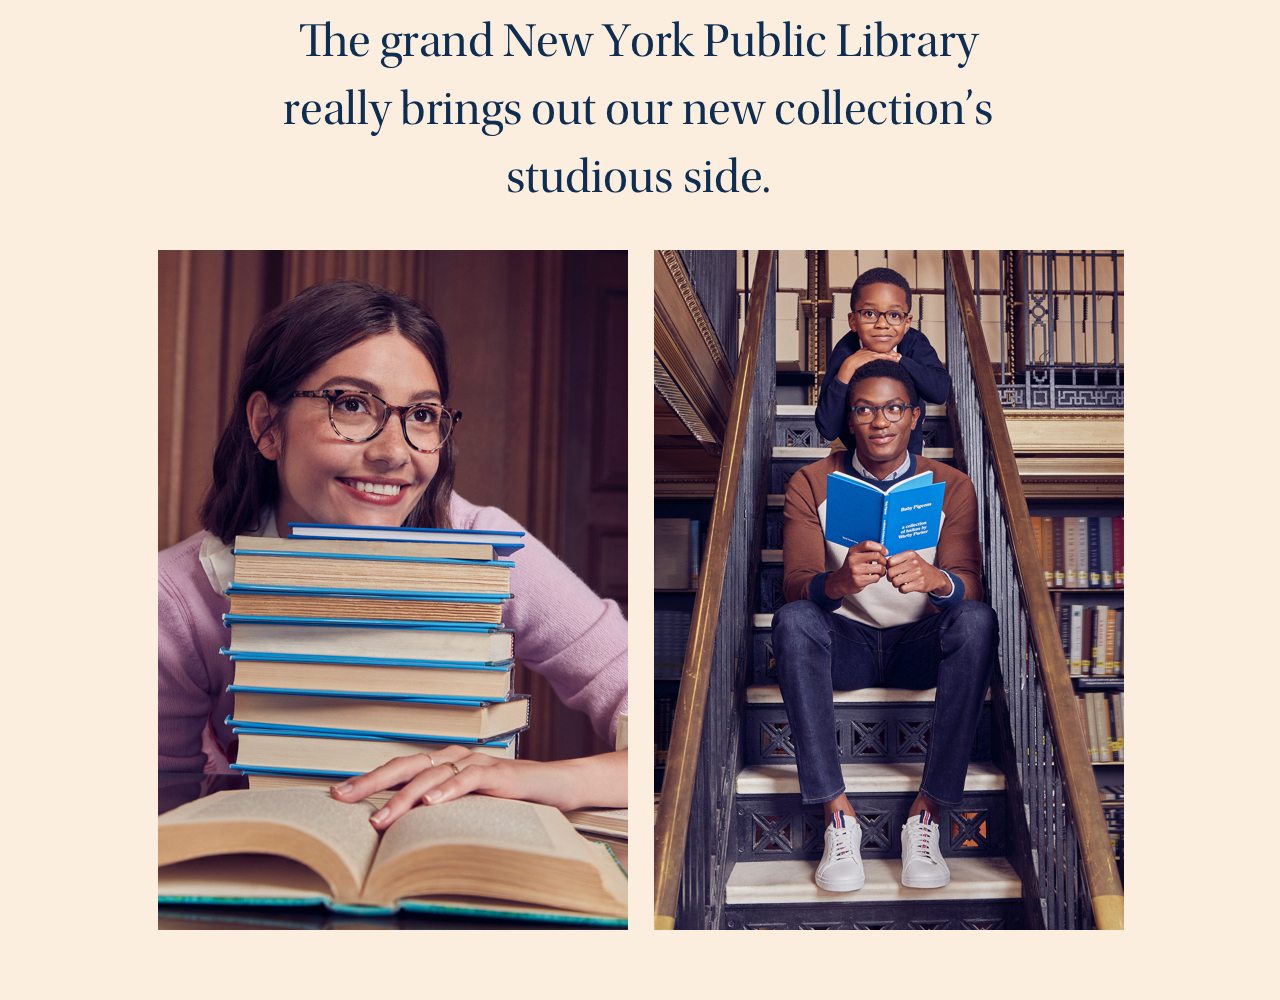 The grand New York Public Library really brings out our new collection’s studious side.